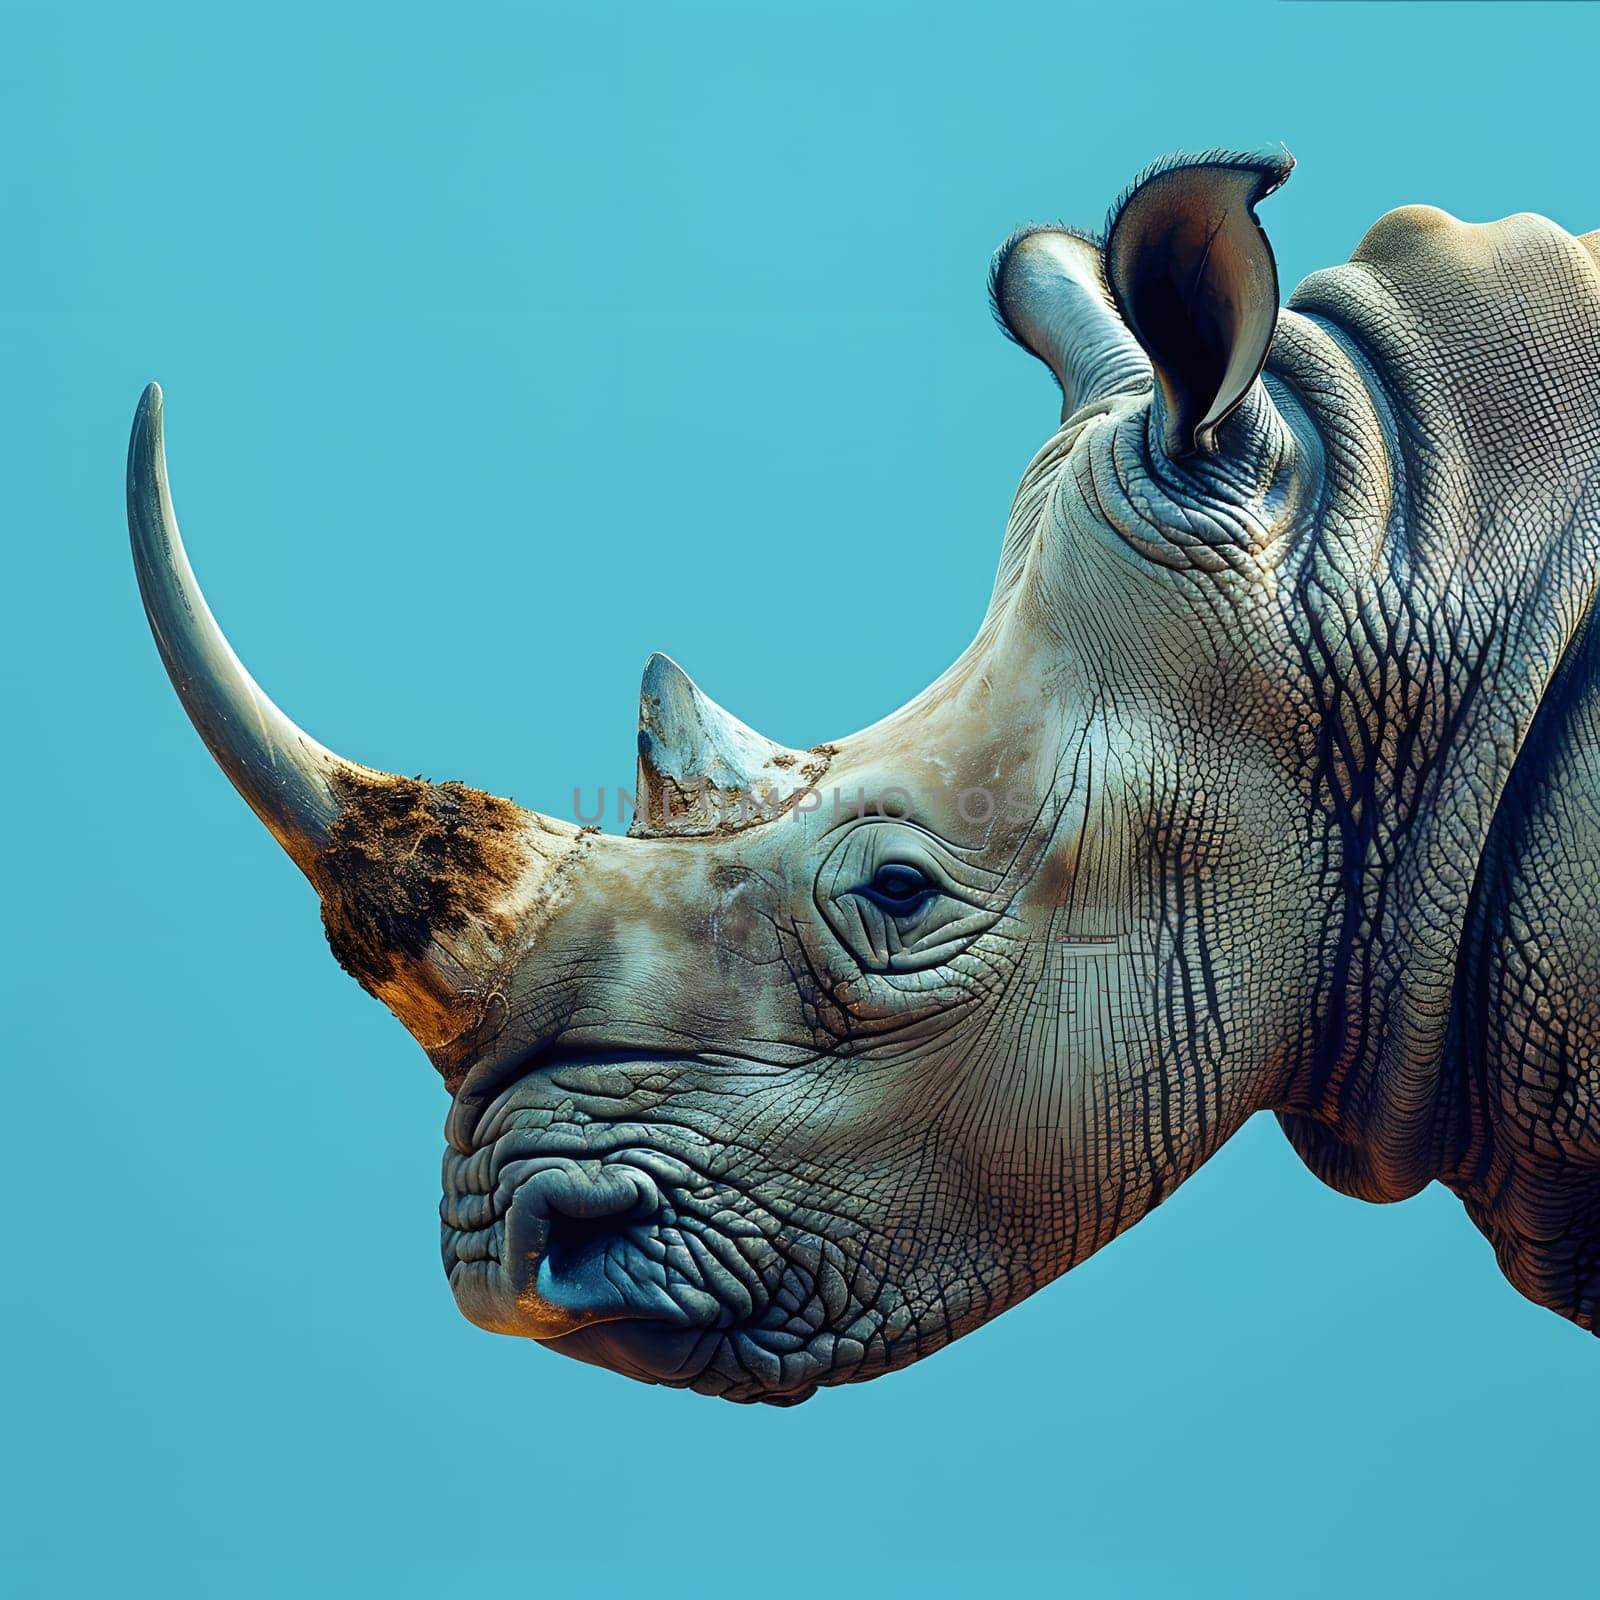 Close up of Black rhinoceros head with horn and jaw against blue sky by Nadtochiy